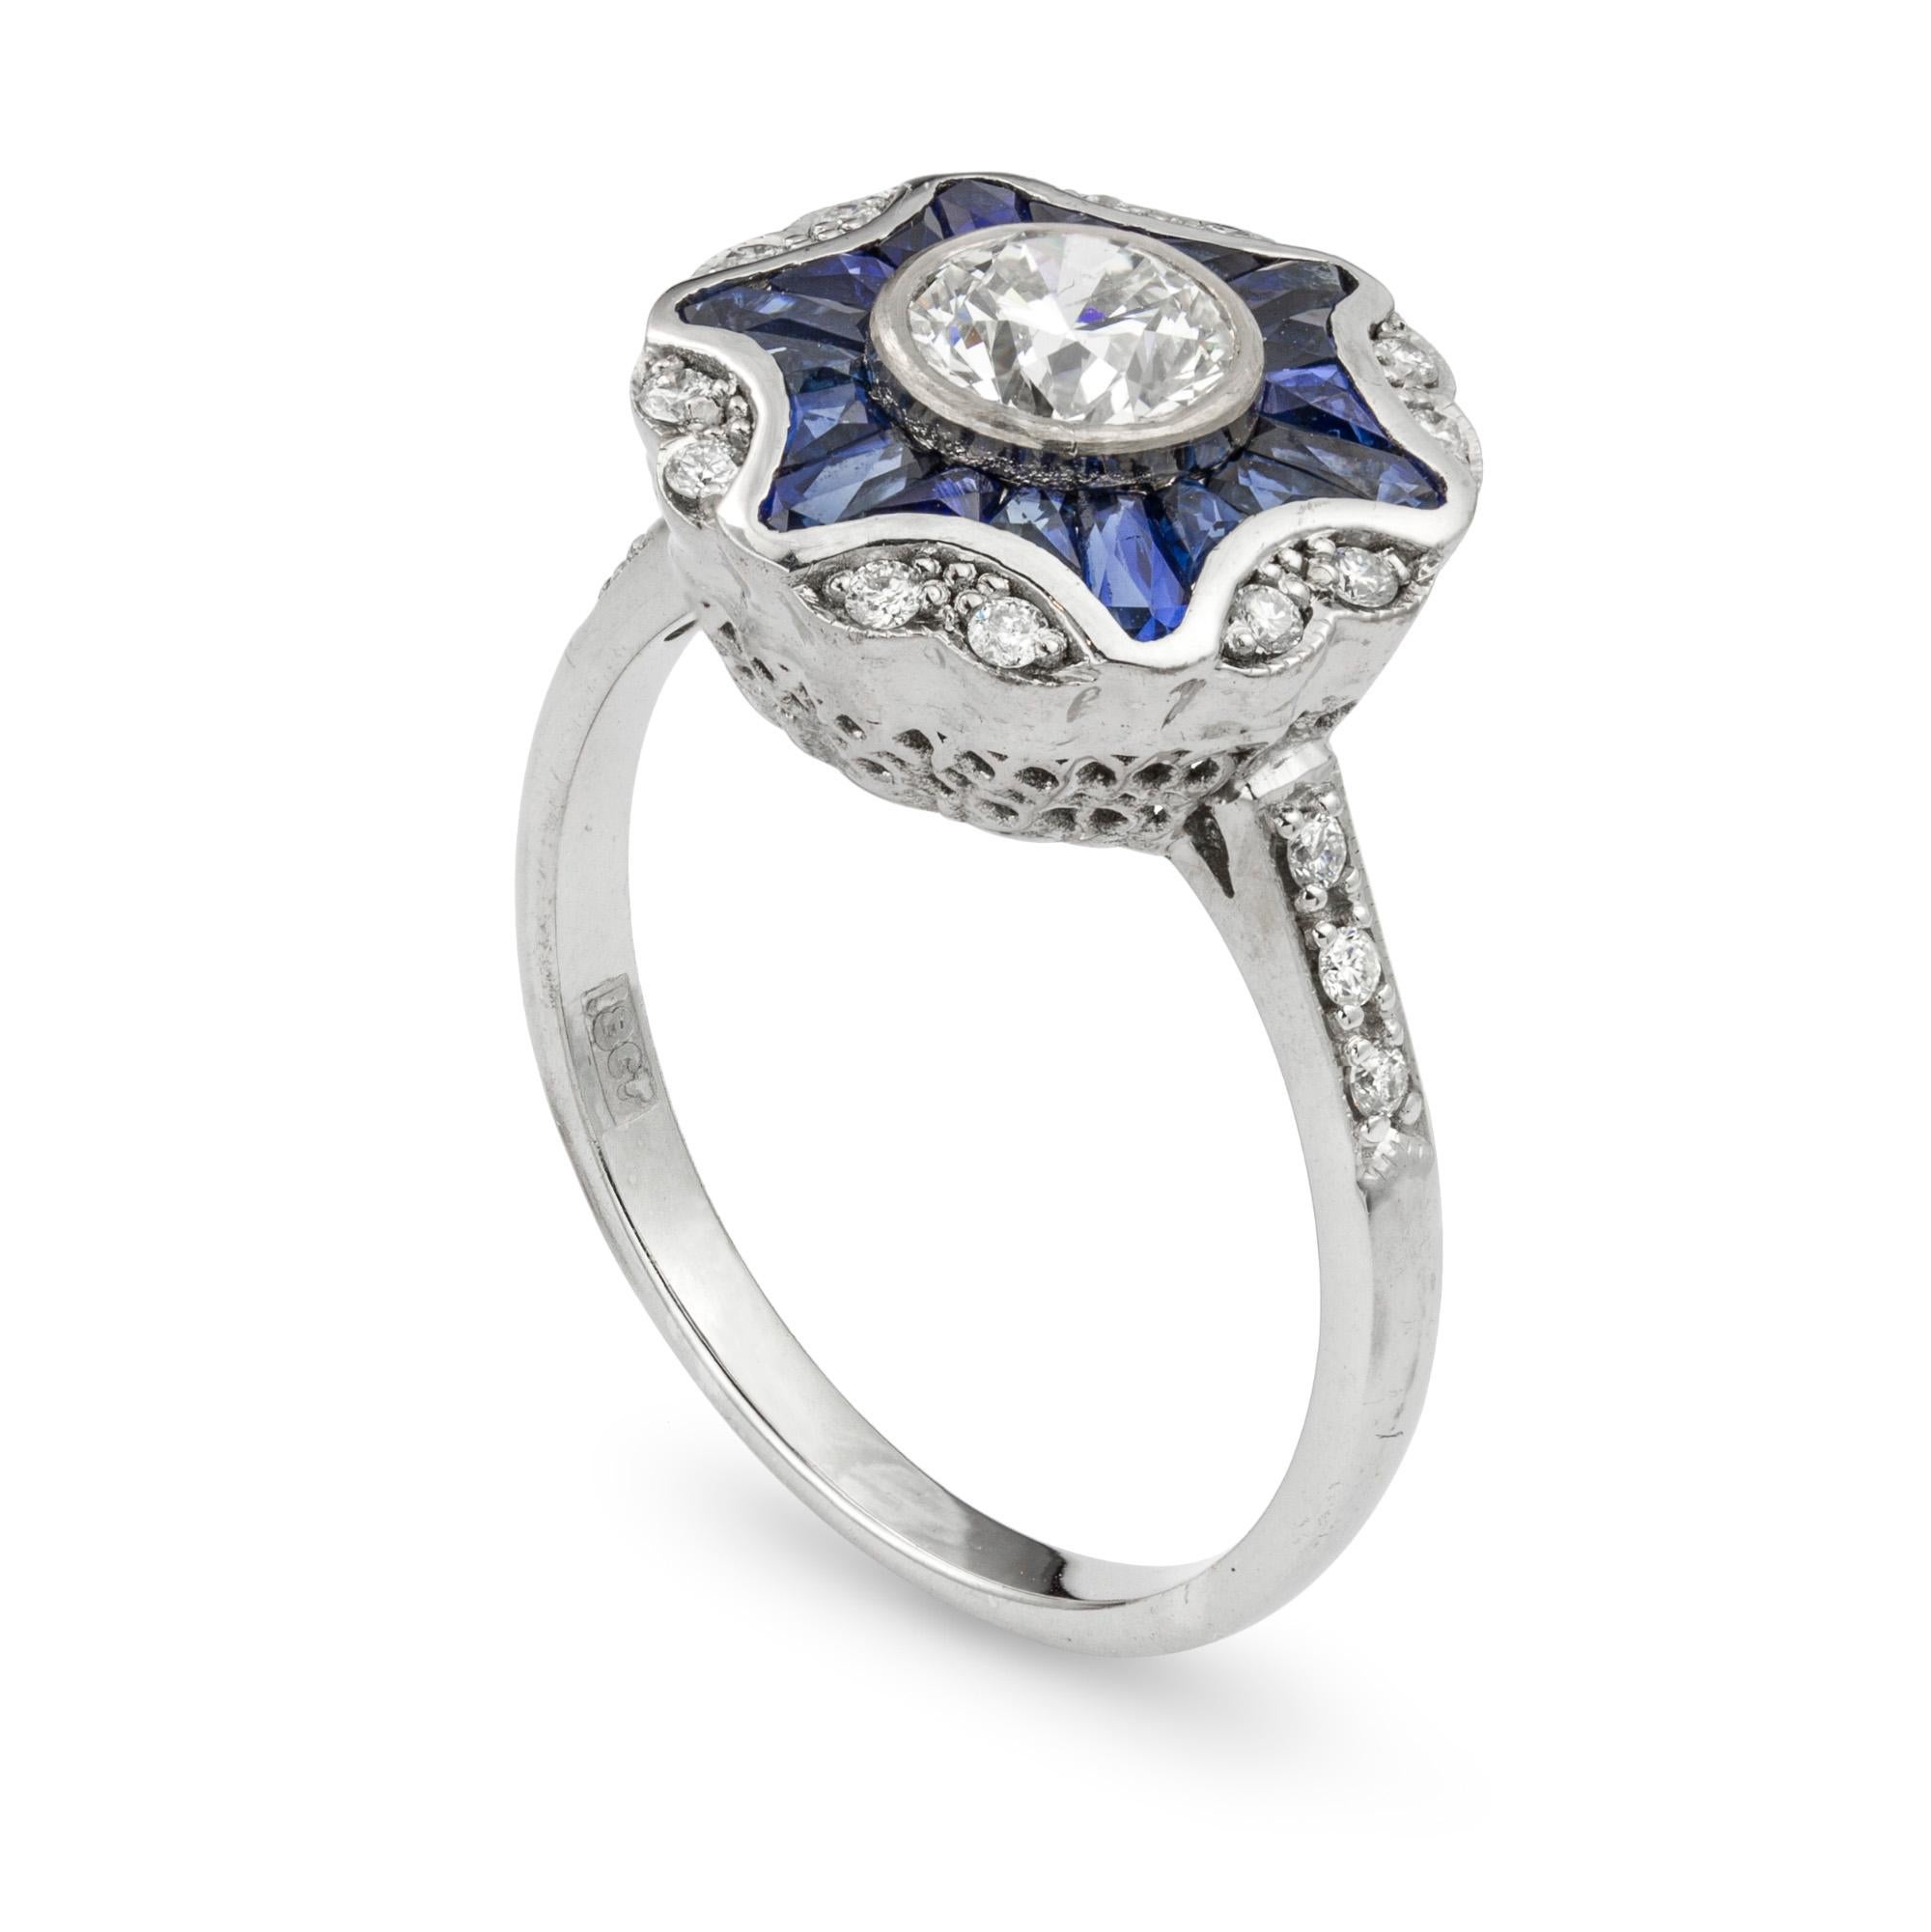 A diamond and sapphire ring, the centre brilliant-cut diamond accompanied by IGL Certificate stating the weight 0.70 carats of colour H and clarity VS2 surrounded by a star border of sapphires with a round border of diamonds to diamond-set